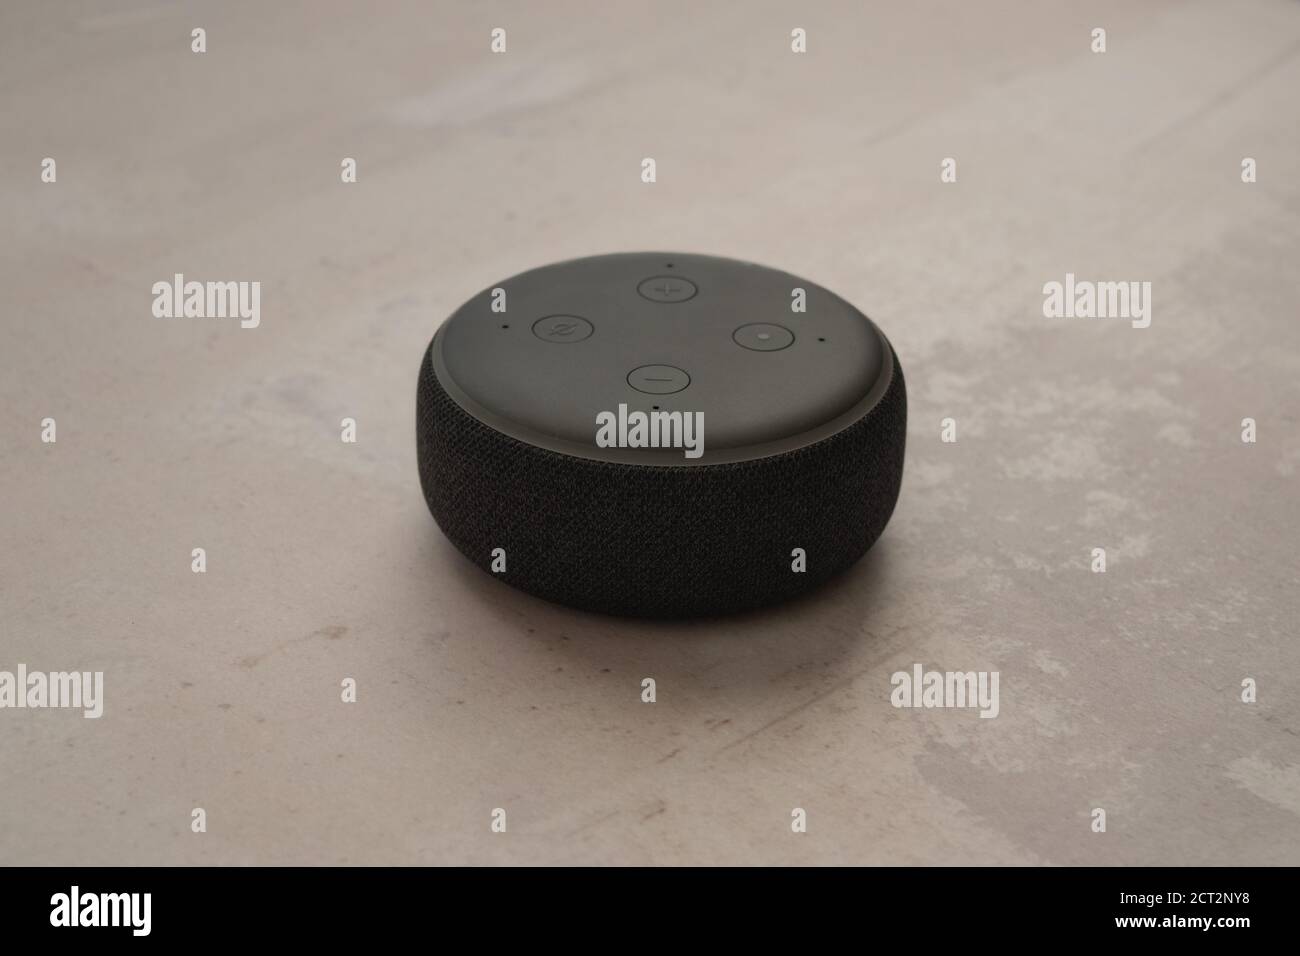 LONDON, UNITED KINGDOM - SEPTEMBER 20 2020: Close-up of an Amazon Echo Dot, the virtual assistant speaker, with a modern concrete stone background. Stock Photo